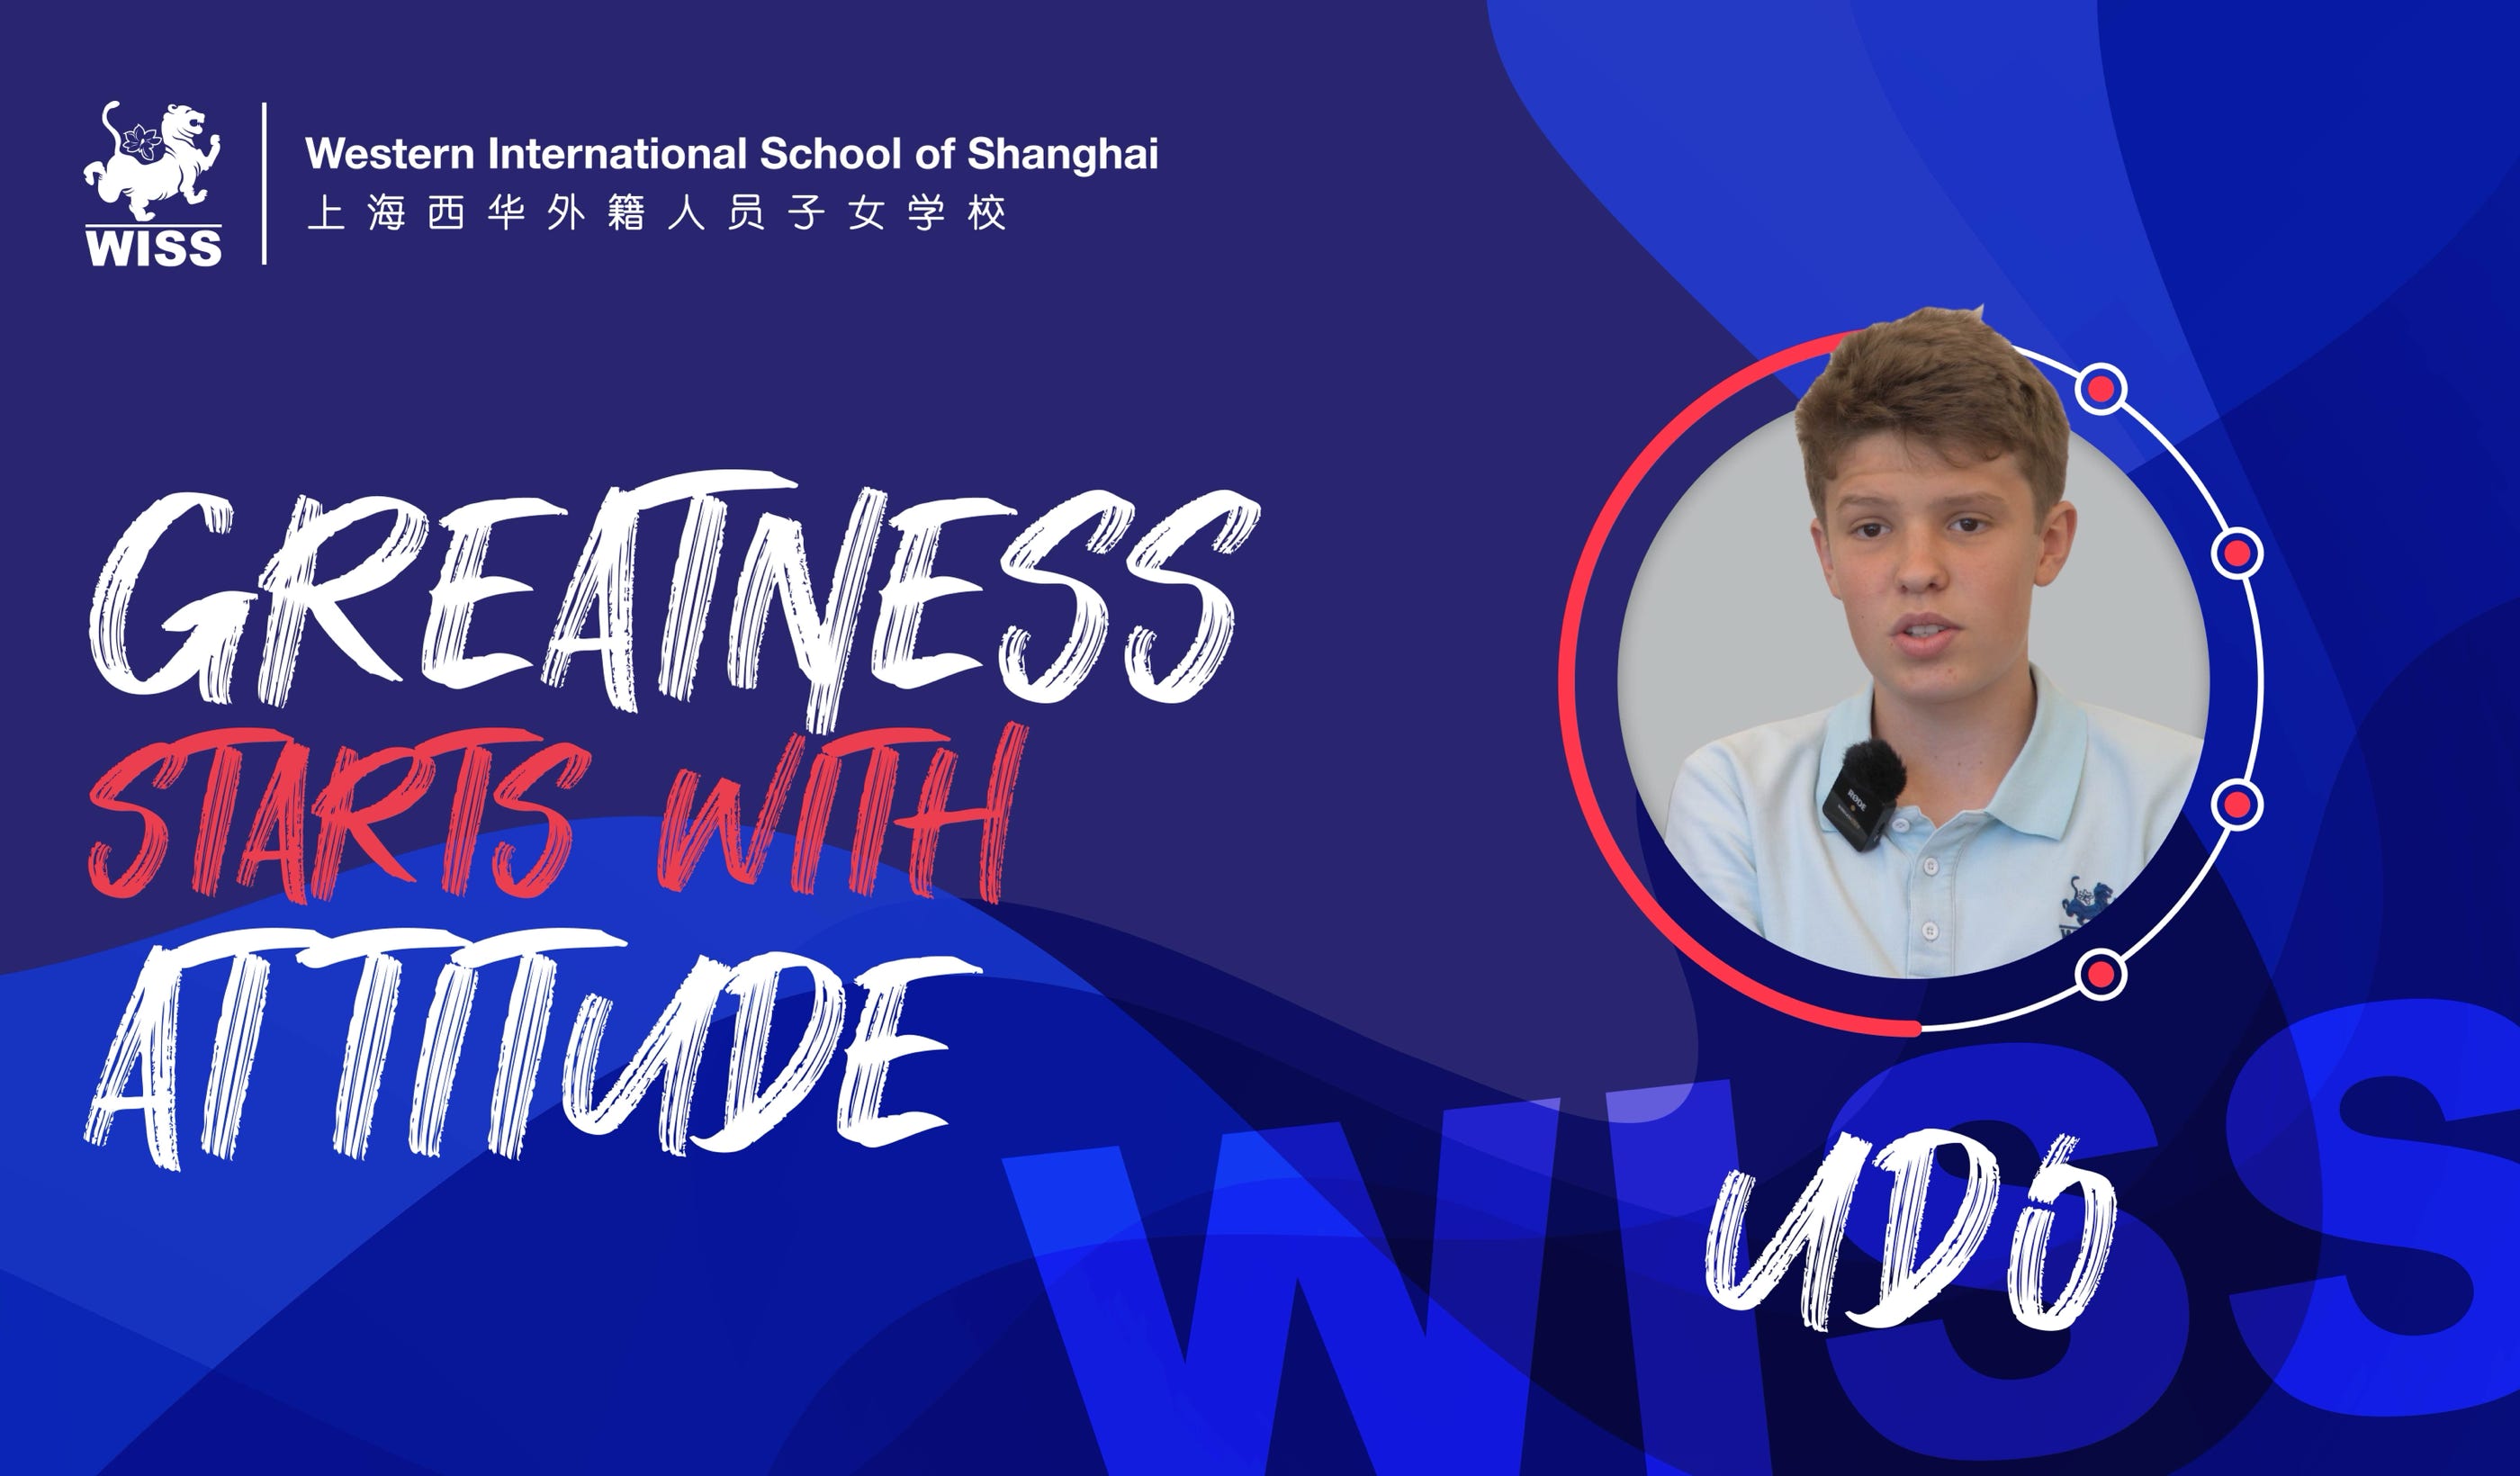 Welcome to the captivating “Greatness Starts With Attitude” series at the Western International School of Shanghai (WISS), where inspiring narratives and profound insights shape our educational philosophy. Today, we delve into the remarkable journey of Timo Pyeon, Director of Academics in Innovation at WISS, as he shares his reflections on the transformative power of attitude and resilience in achieving greatness.